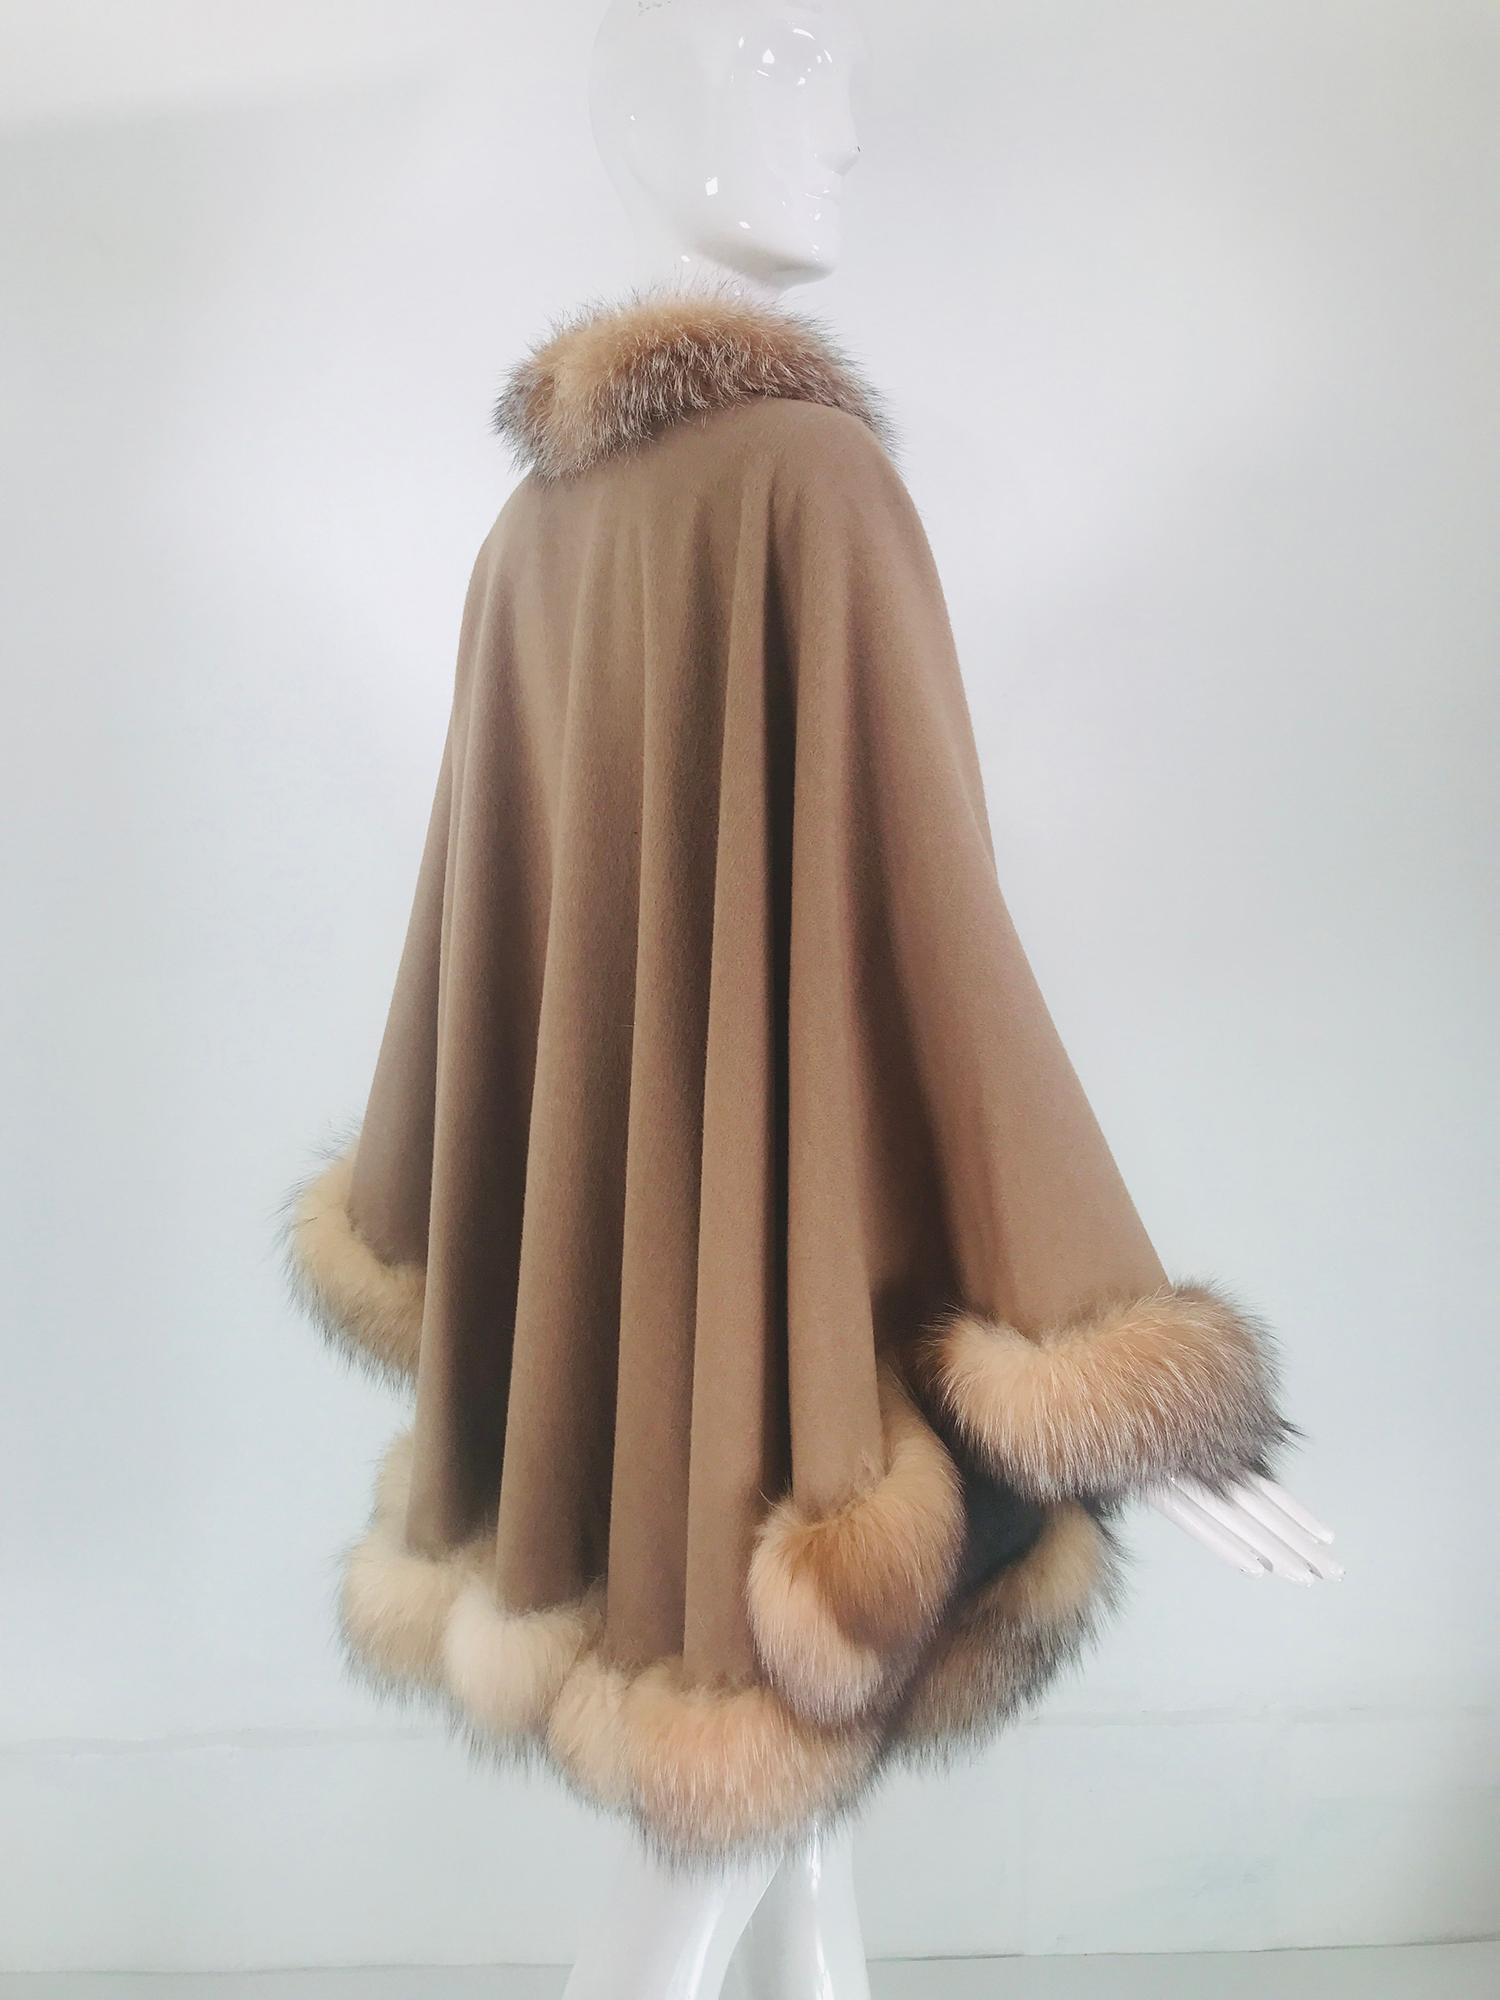 Sprung Freres Paris Red Fox Wool/Cashmere Reversible Cape Grey/Camel Tan OS 1